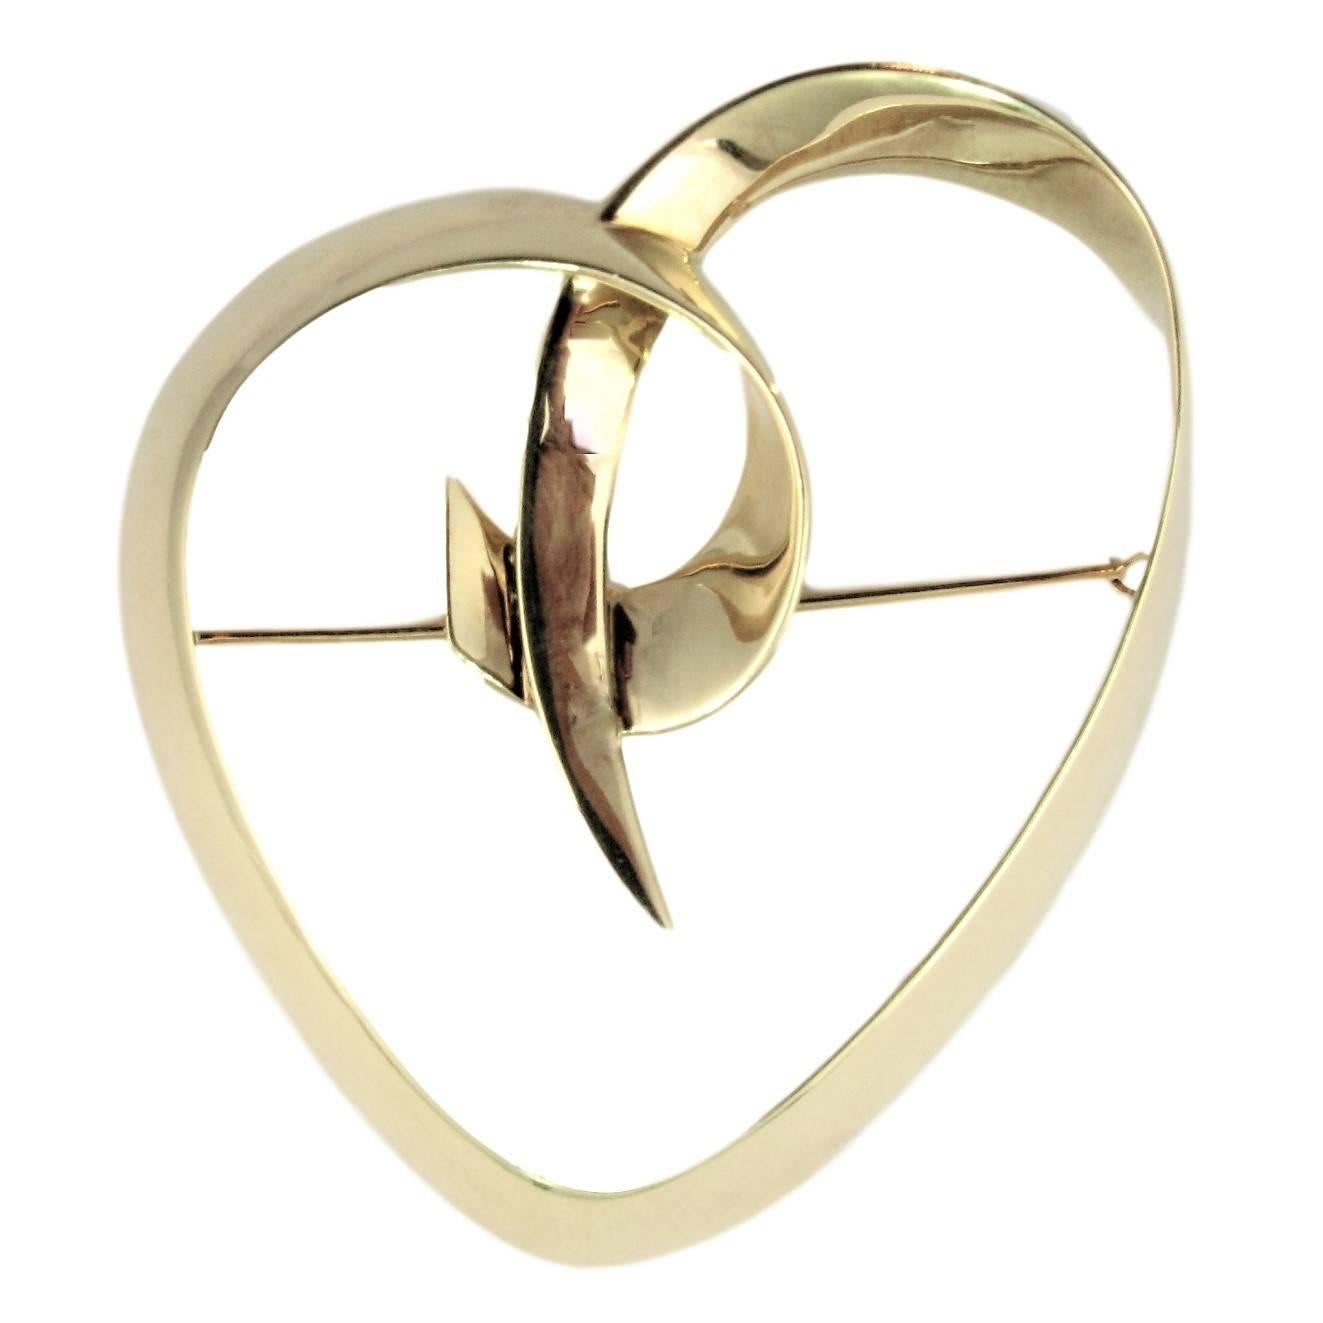 Tiffany & Co. Loving Heart Yellow Gold Brooch by Paloma Picasso. For Sale